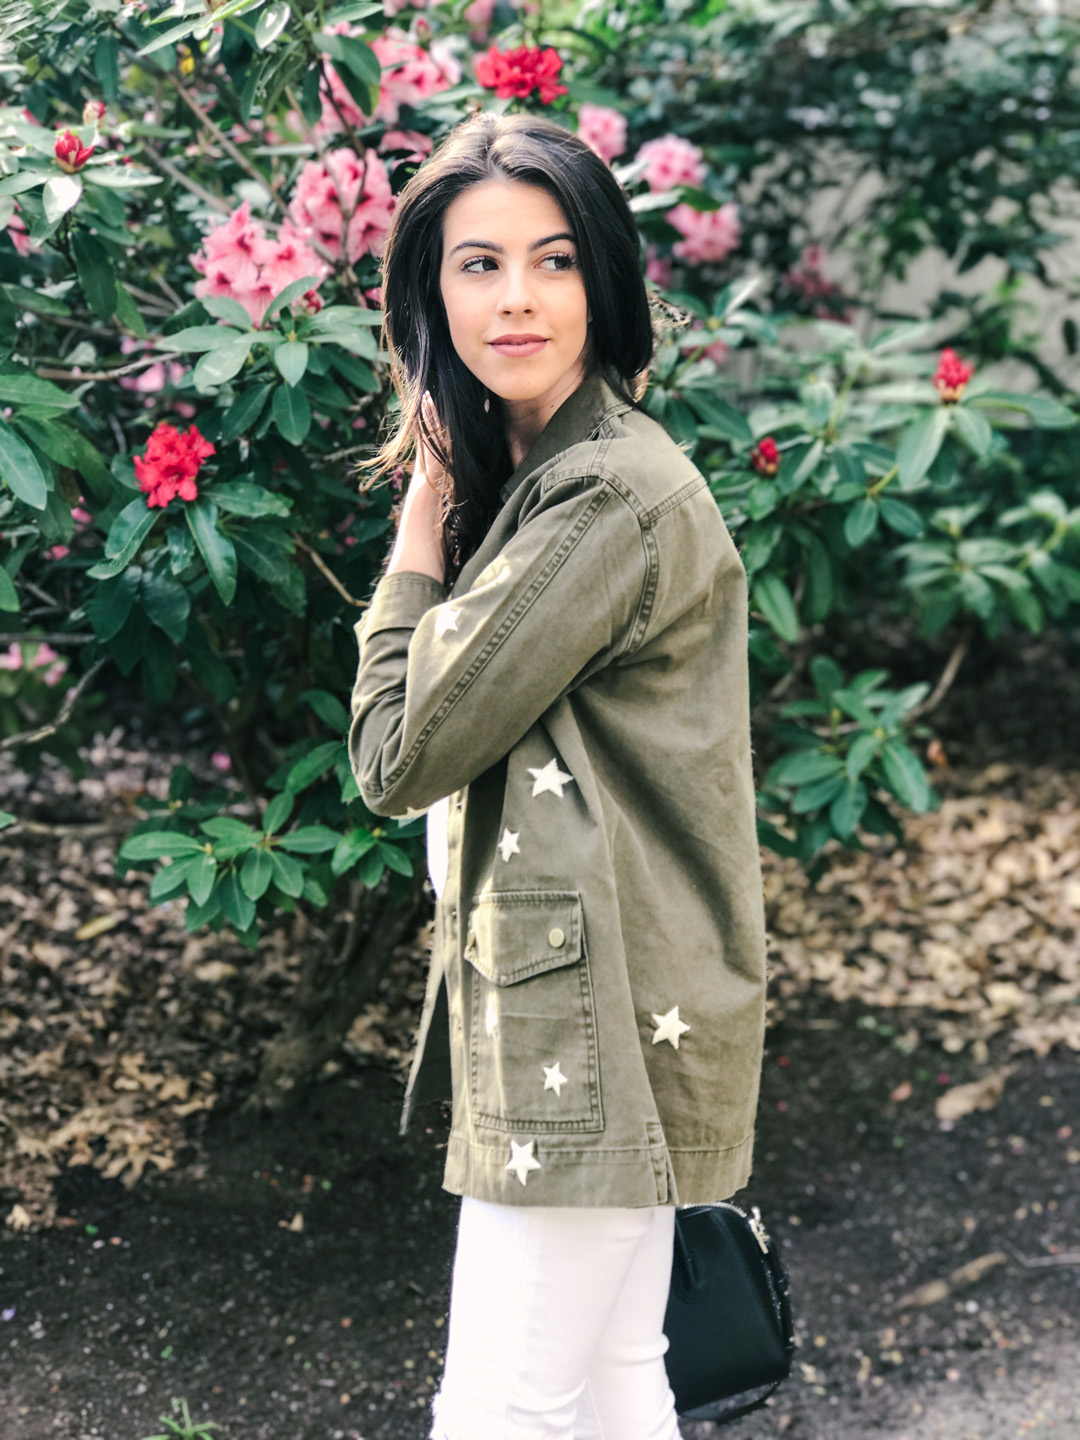 Jackie Roque styling the Sincerely Jules Bailey Stars Jacket in Vancouver.